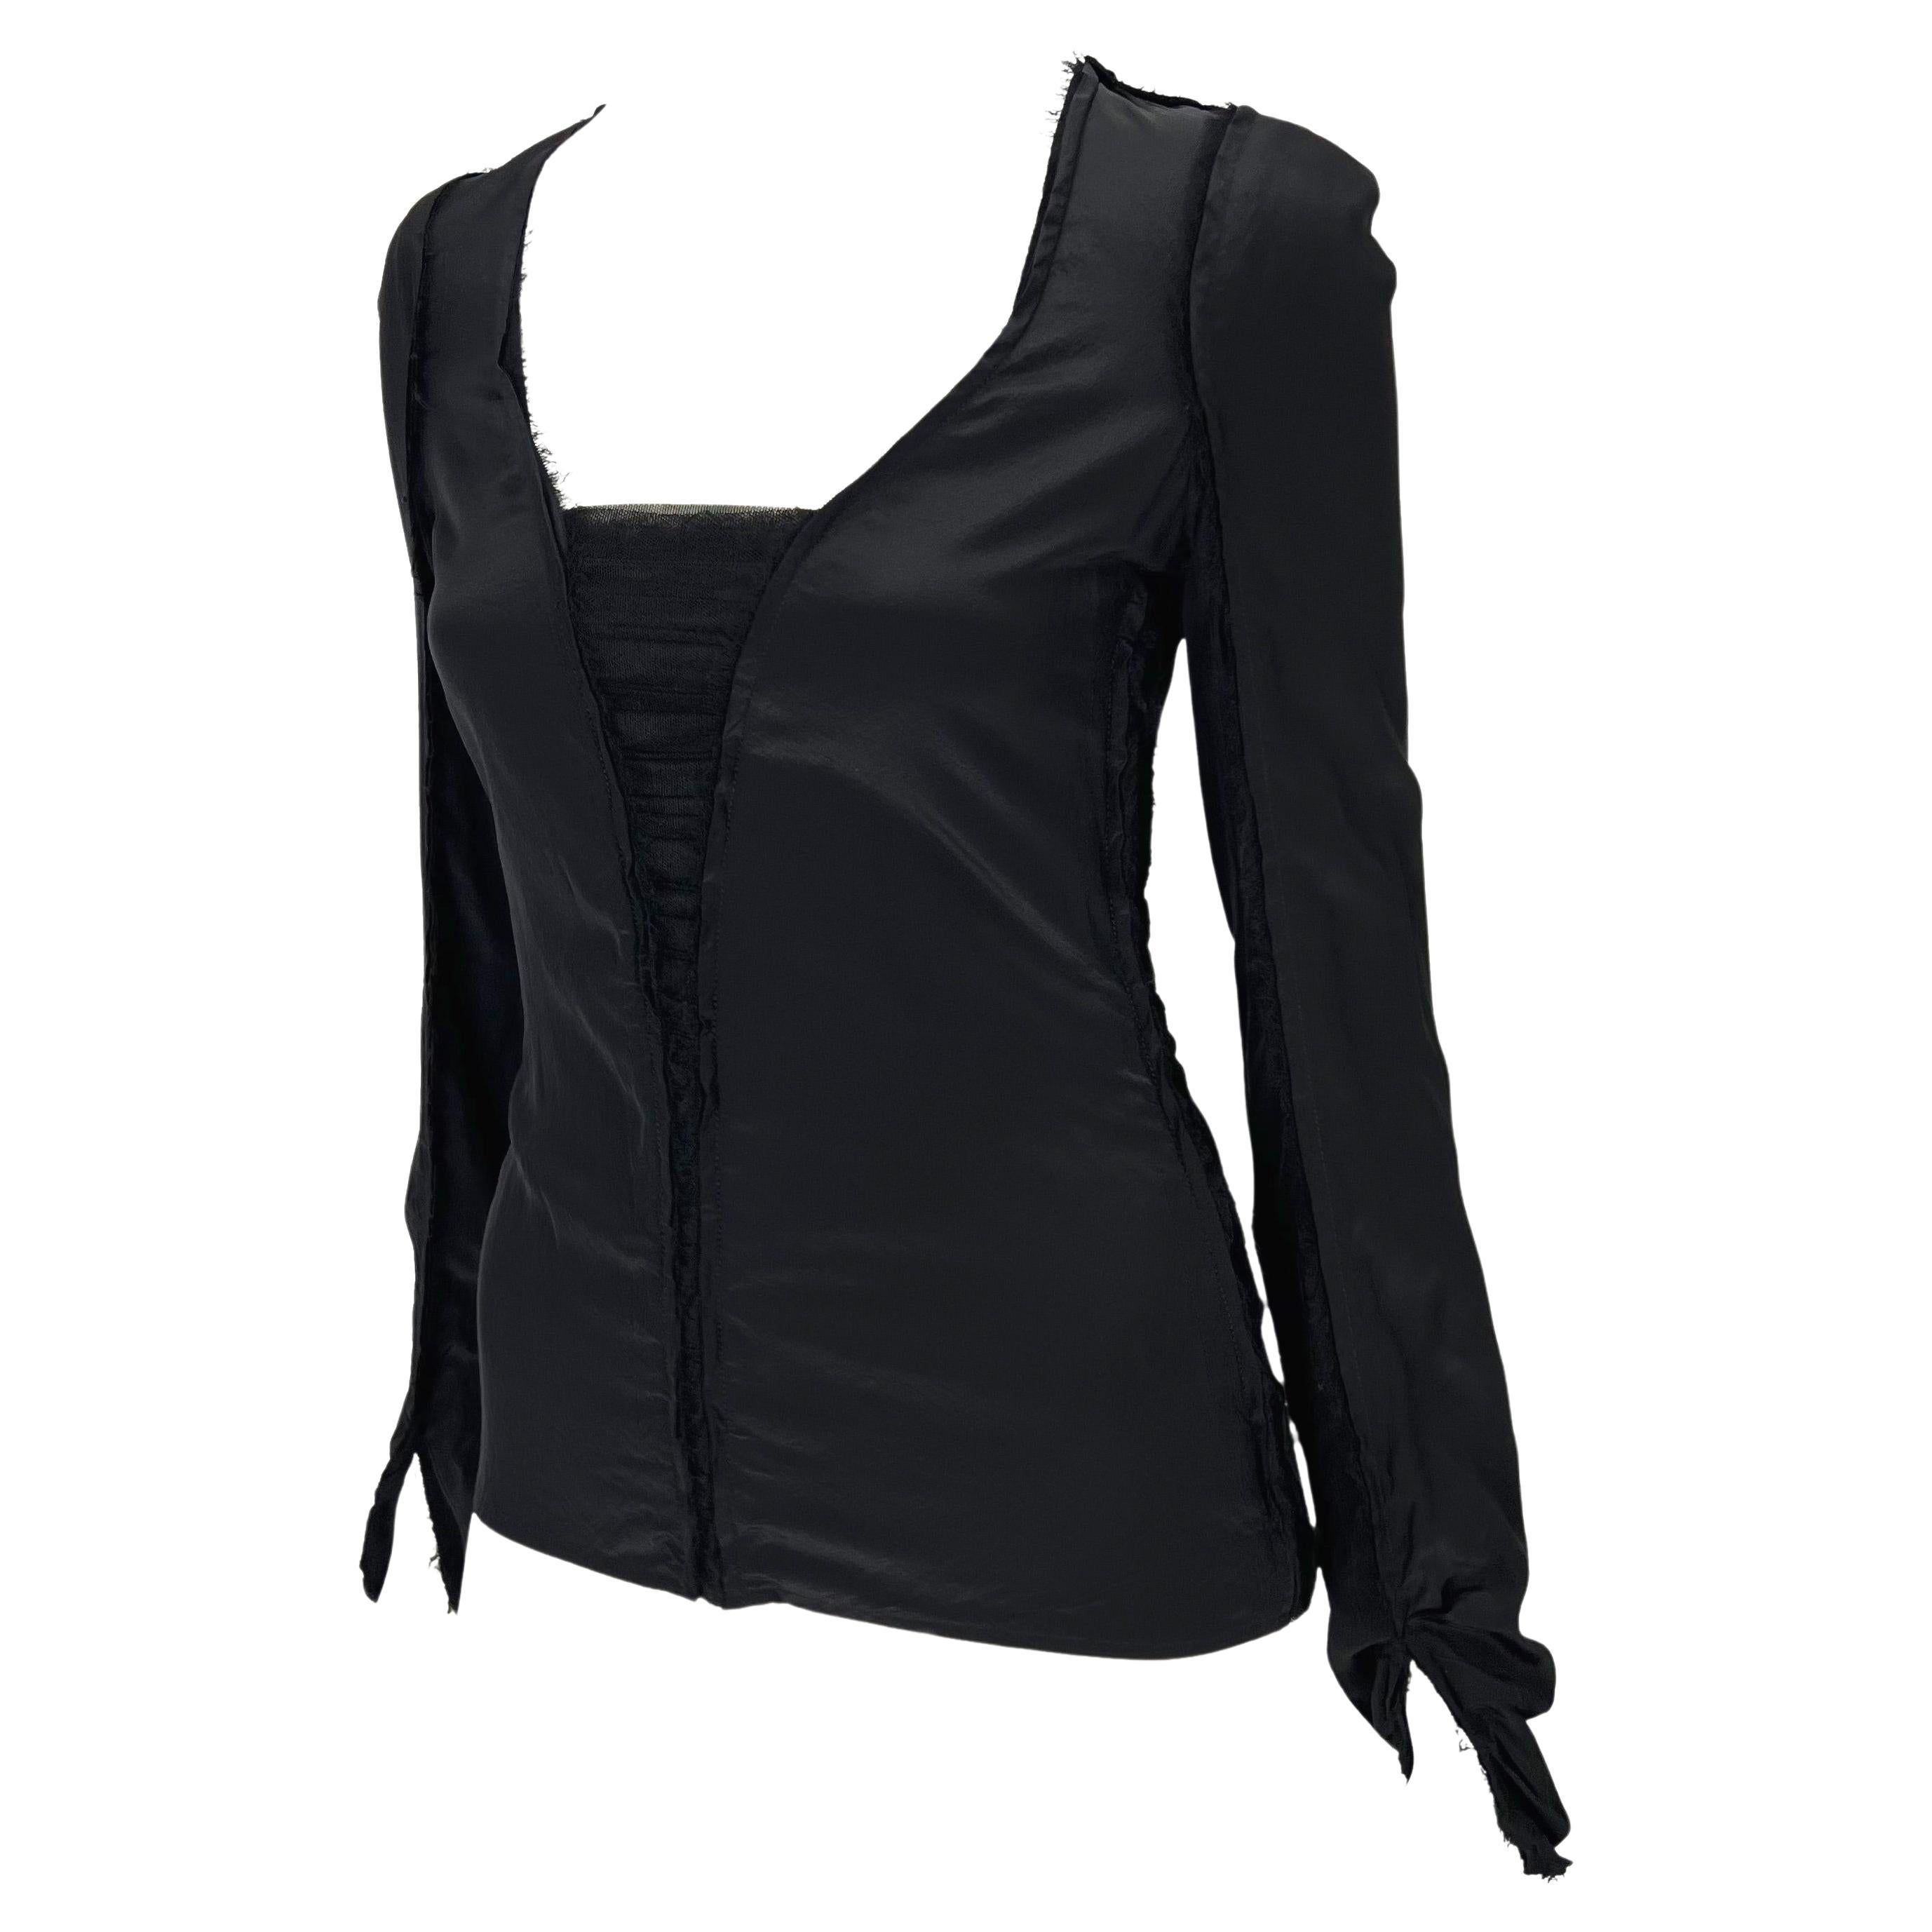 Presenting a black raw edge long sleeve Yves Saint Laurent Rive Gauche top, designed by Tom Ford. From the Fall/Winter 2002 collection, this top features sheer organza details that connect silk panels. This fabulous top features raw hems and is made